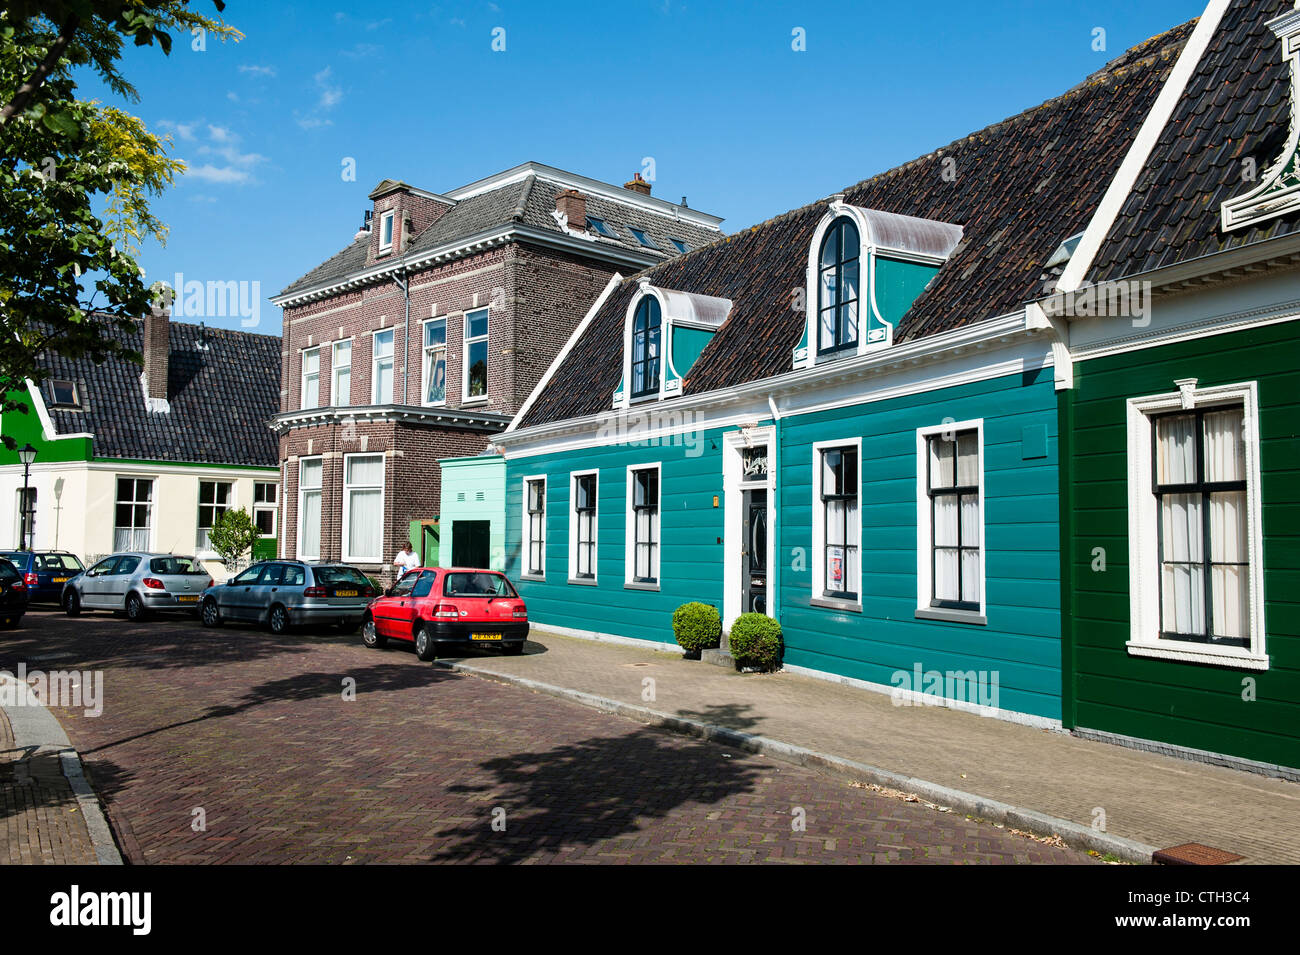 The Zaanse Schans is a neighbourhood of Zaandam. It has a collection of well-preserved historic windmills and houses. Stock Photo